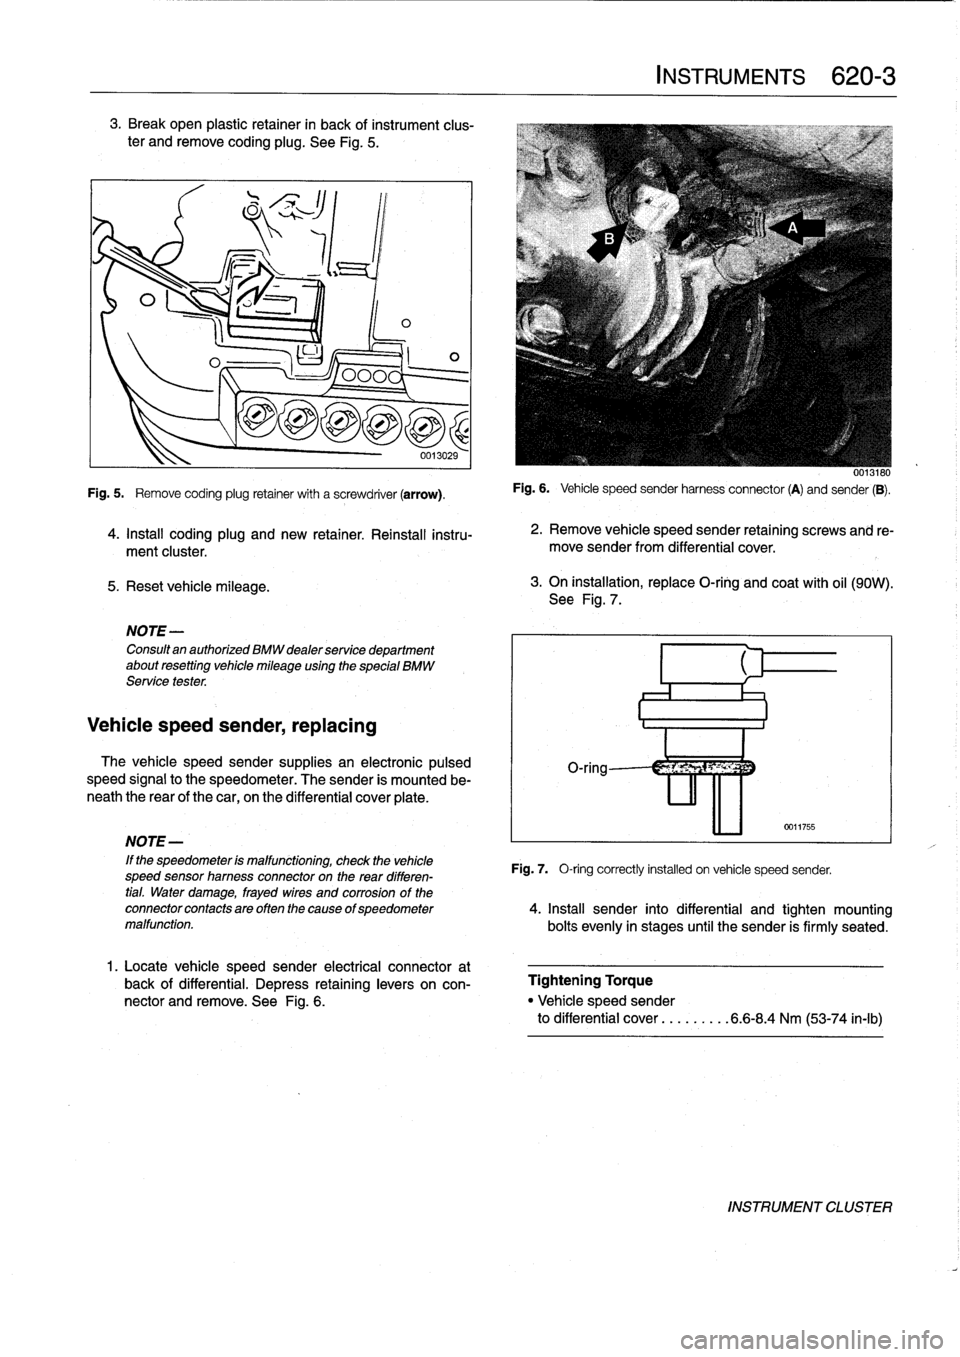 BMW 323i 1993 E36 Workshop Manual 3
.
Break
open
plastic
retainer
in
back
of
instrument
clus-
ter
andremove
coding
plug
.
See
Fig
.
5
.

5
.
Reset
vehicle
mileage
.

1
ILO

NOTE-

Consultan
authorized
BMW
dealer
service
department
abo